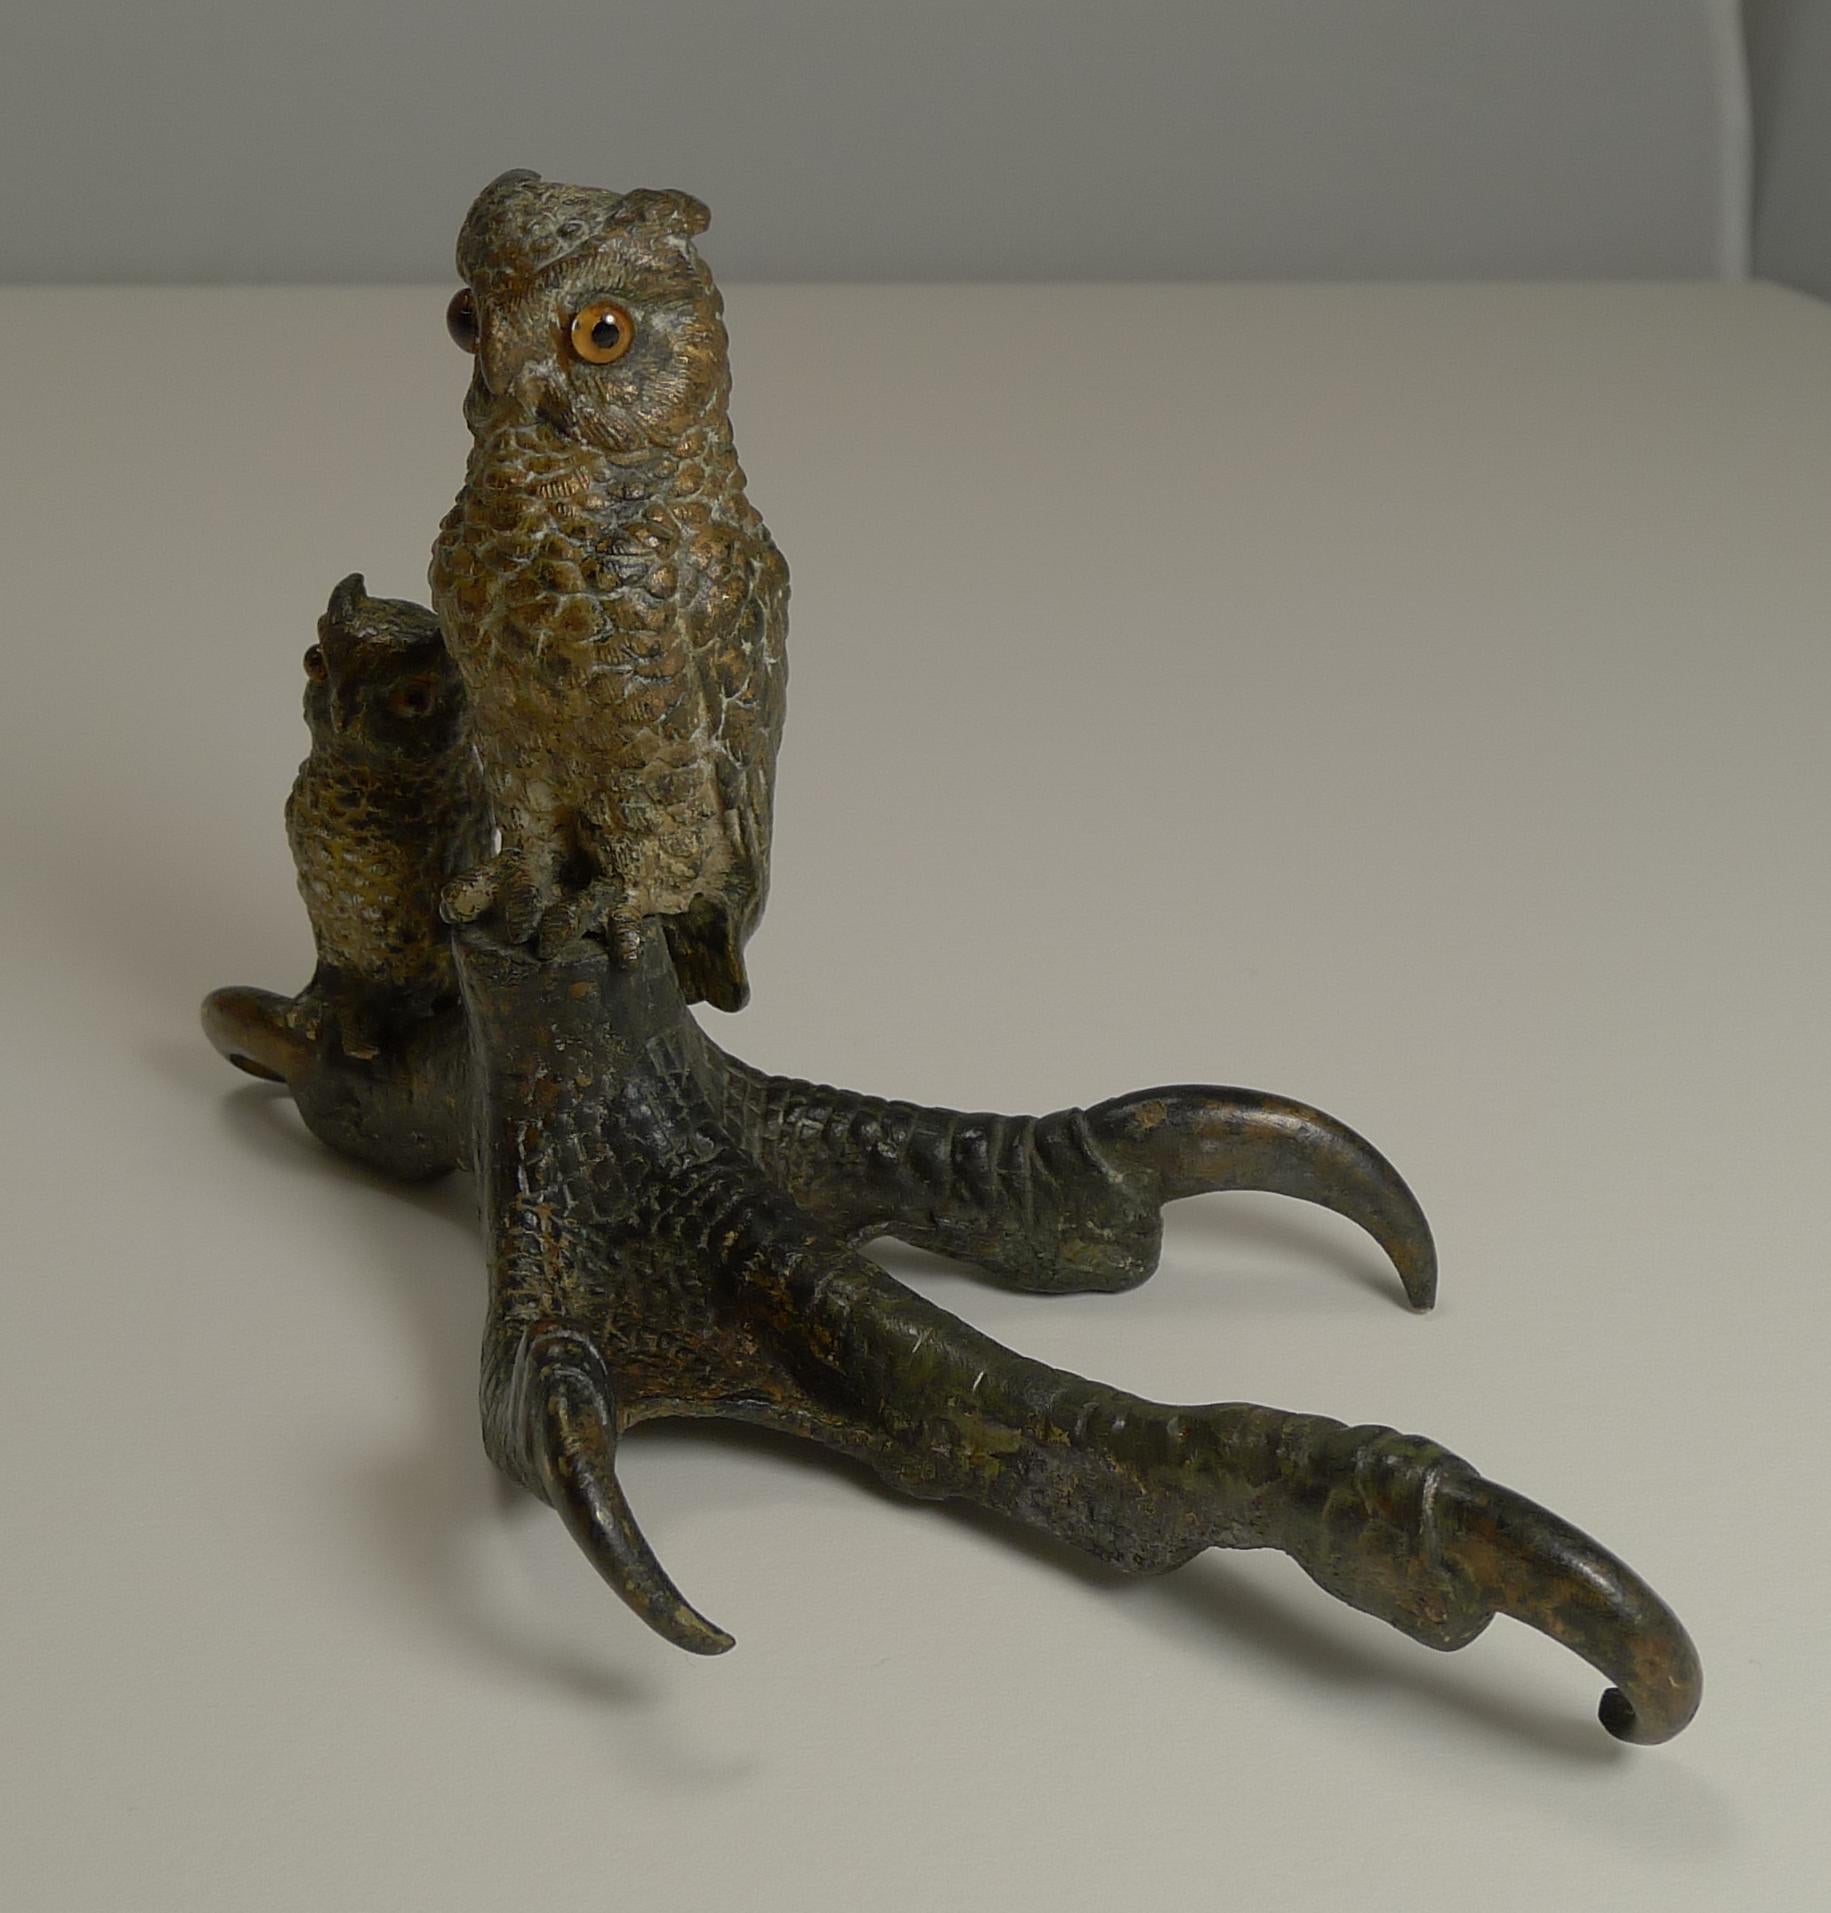 A really charming Austrian figural bronze, with an adult and young Owl both sitting on a large Owls foot.

Both have glass eyes and the piece remains in excellent condition measuring 6 1/2